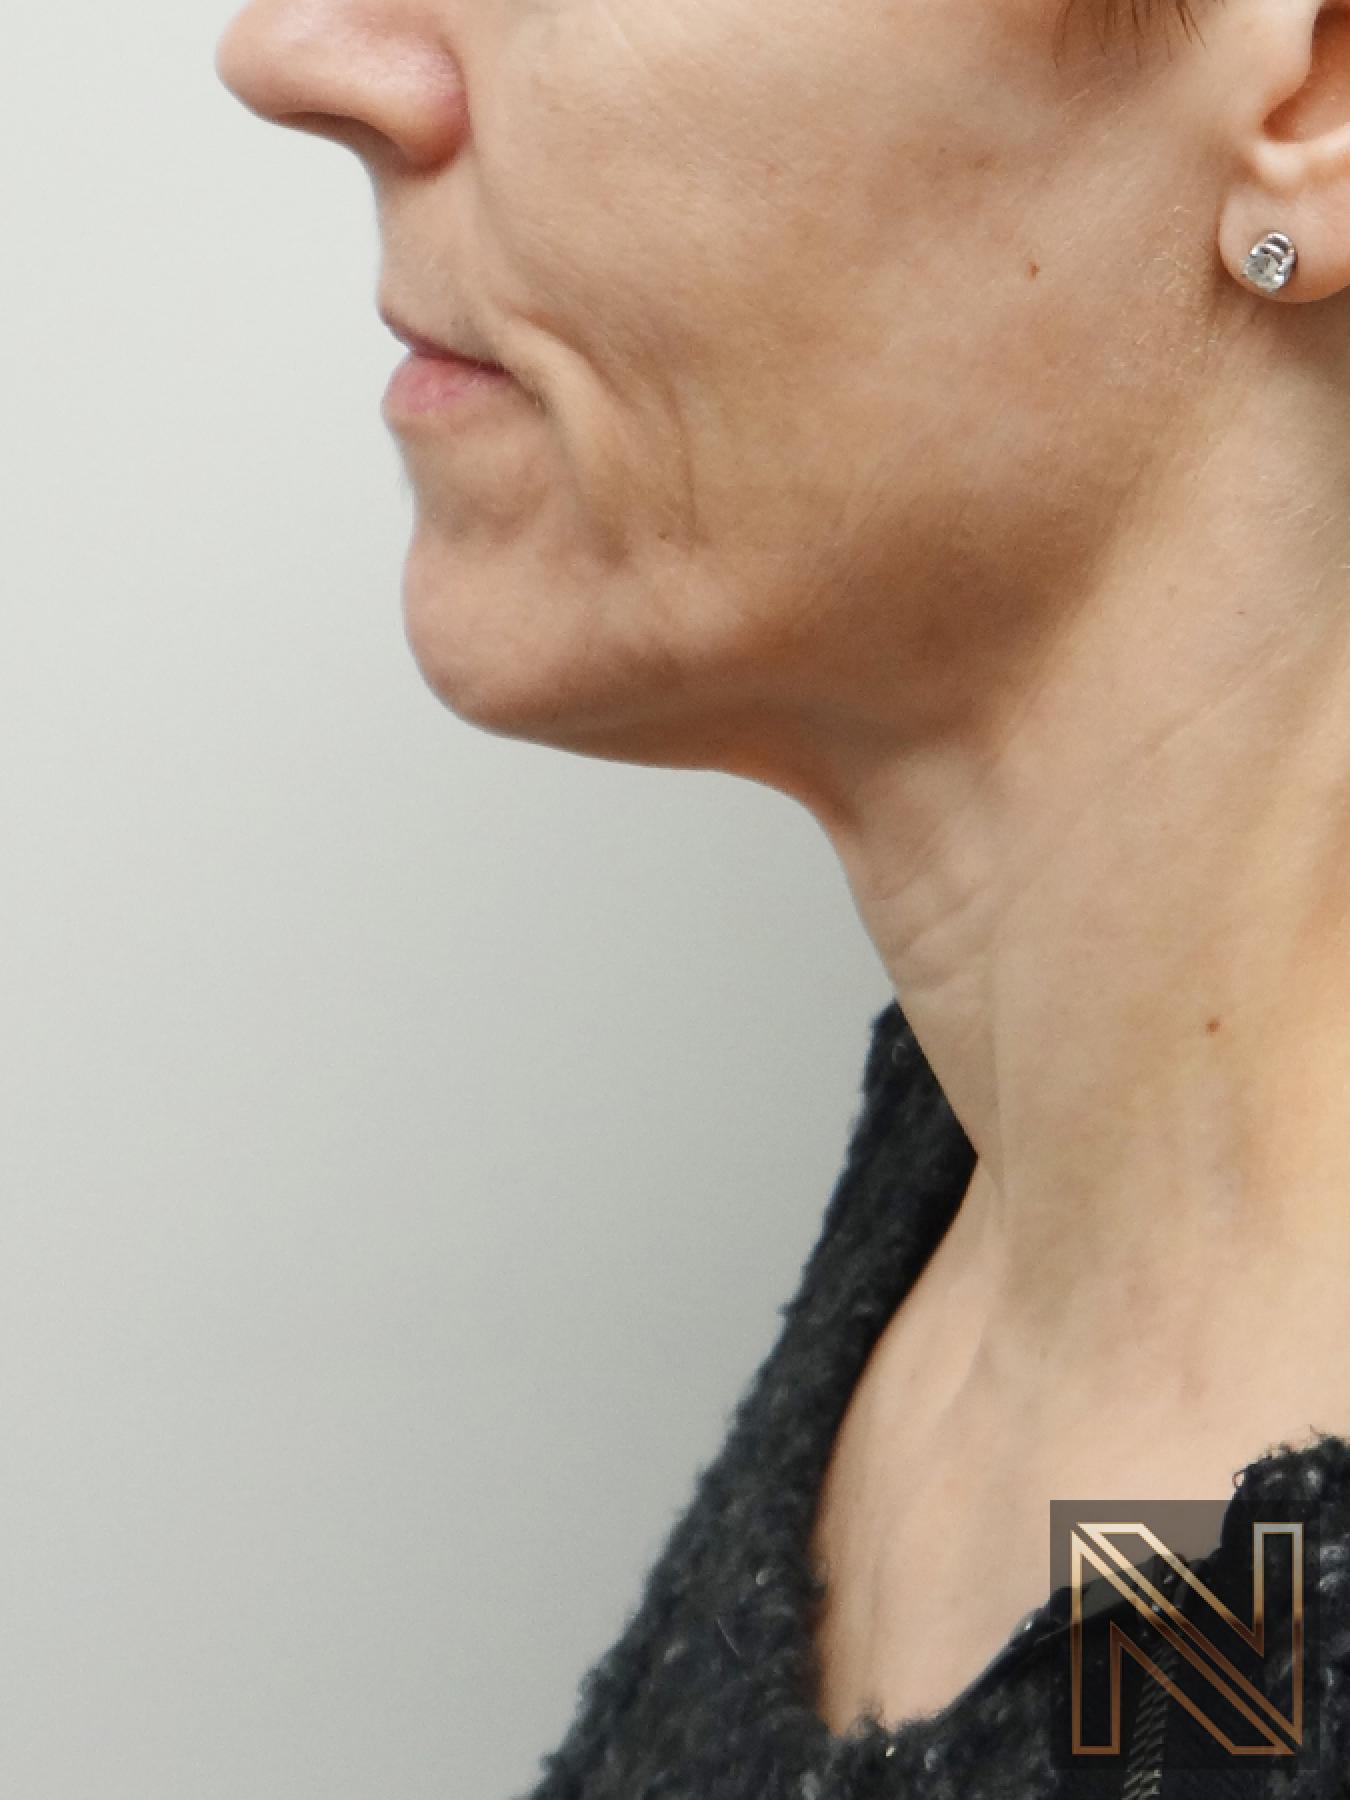 Ultherapy®: Patient 1 - Before 1